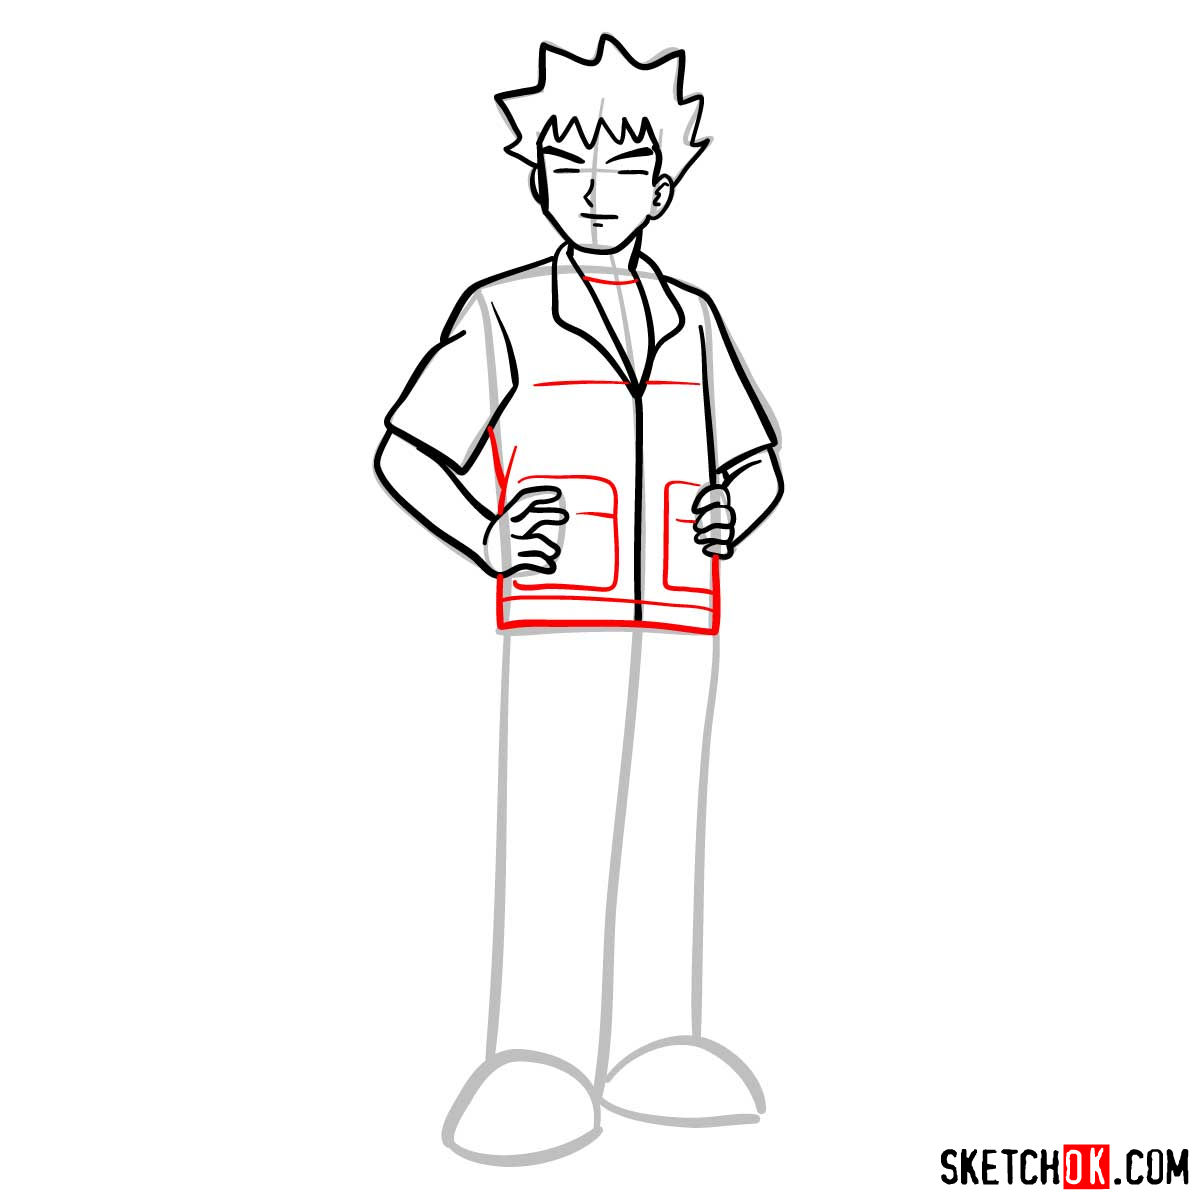 How to draw Brock from Pokemon anime - step 11